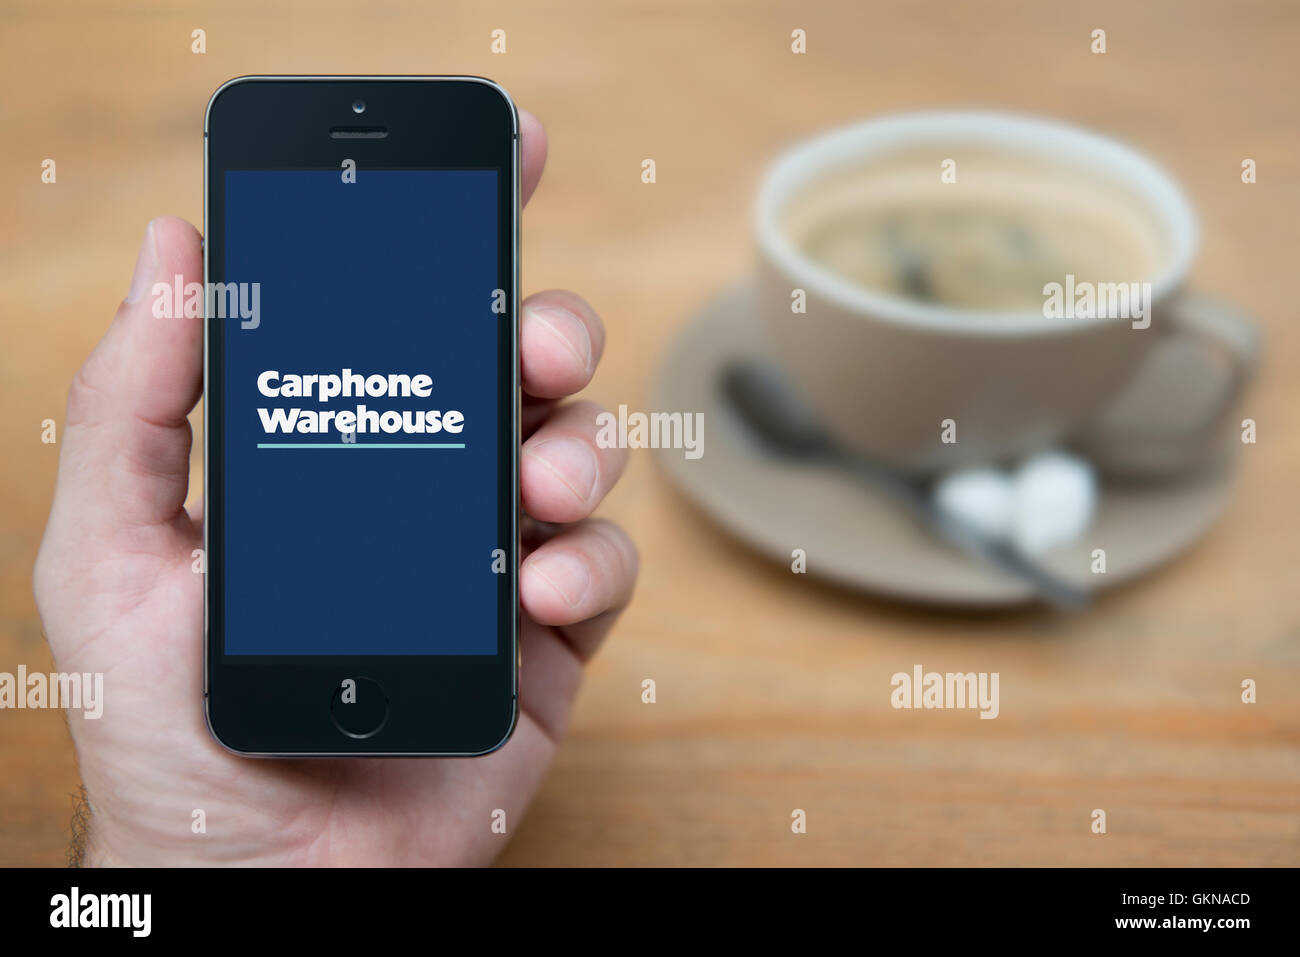 A man looks at his iPhone which displays the Carphone Warehouse logo, while sat with a cup of coffee (Editorial use only). Stock Photo